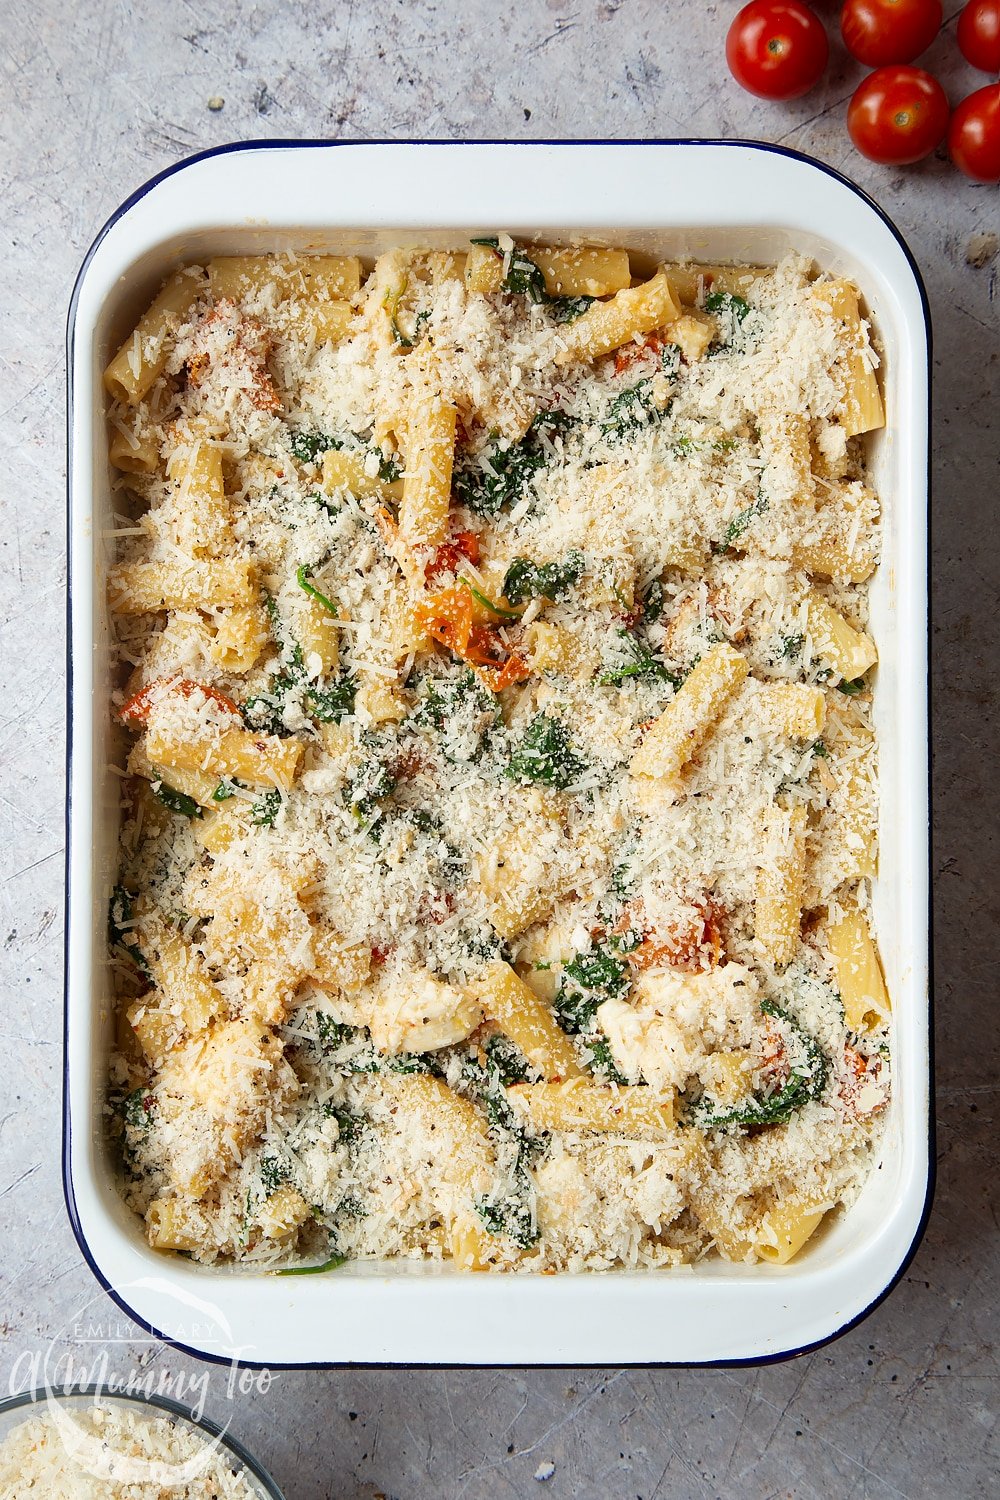 Sprinkling the cheese over the Cherry tomato, spinach and garlic mozzarella pasta bake in a tray pan.